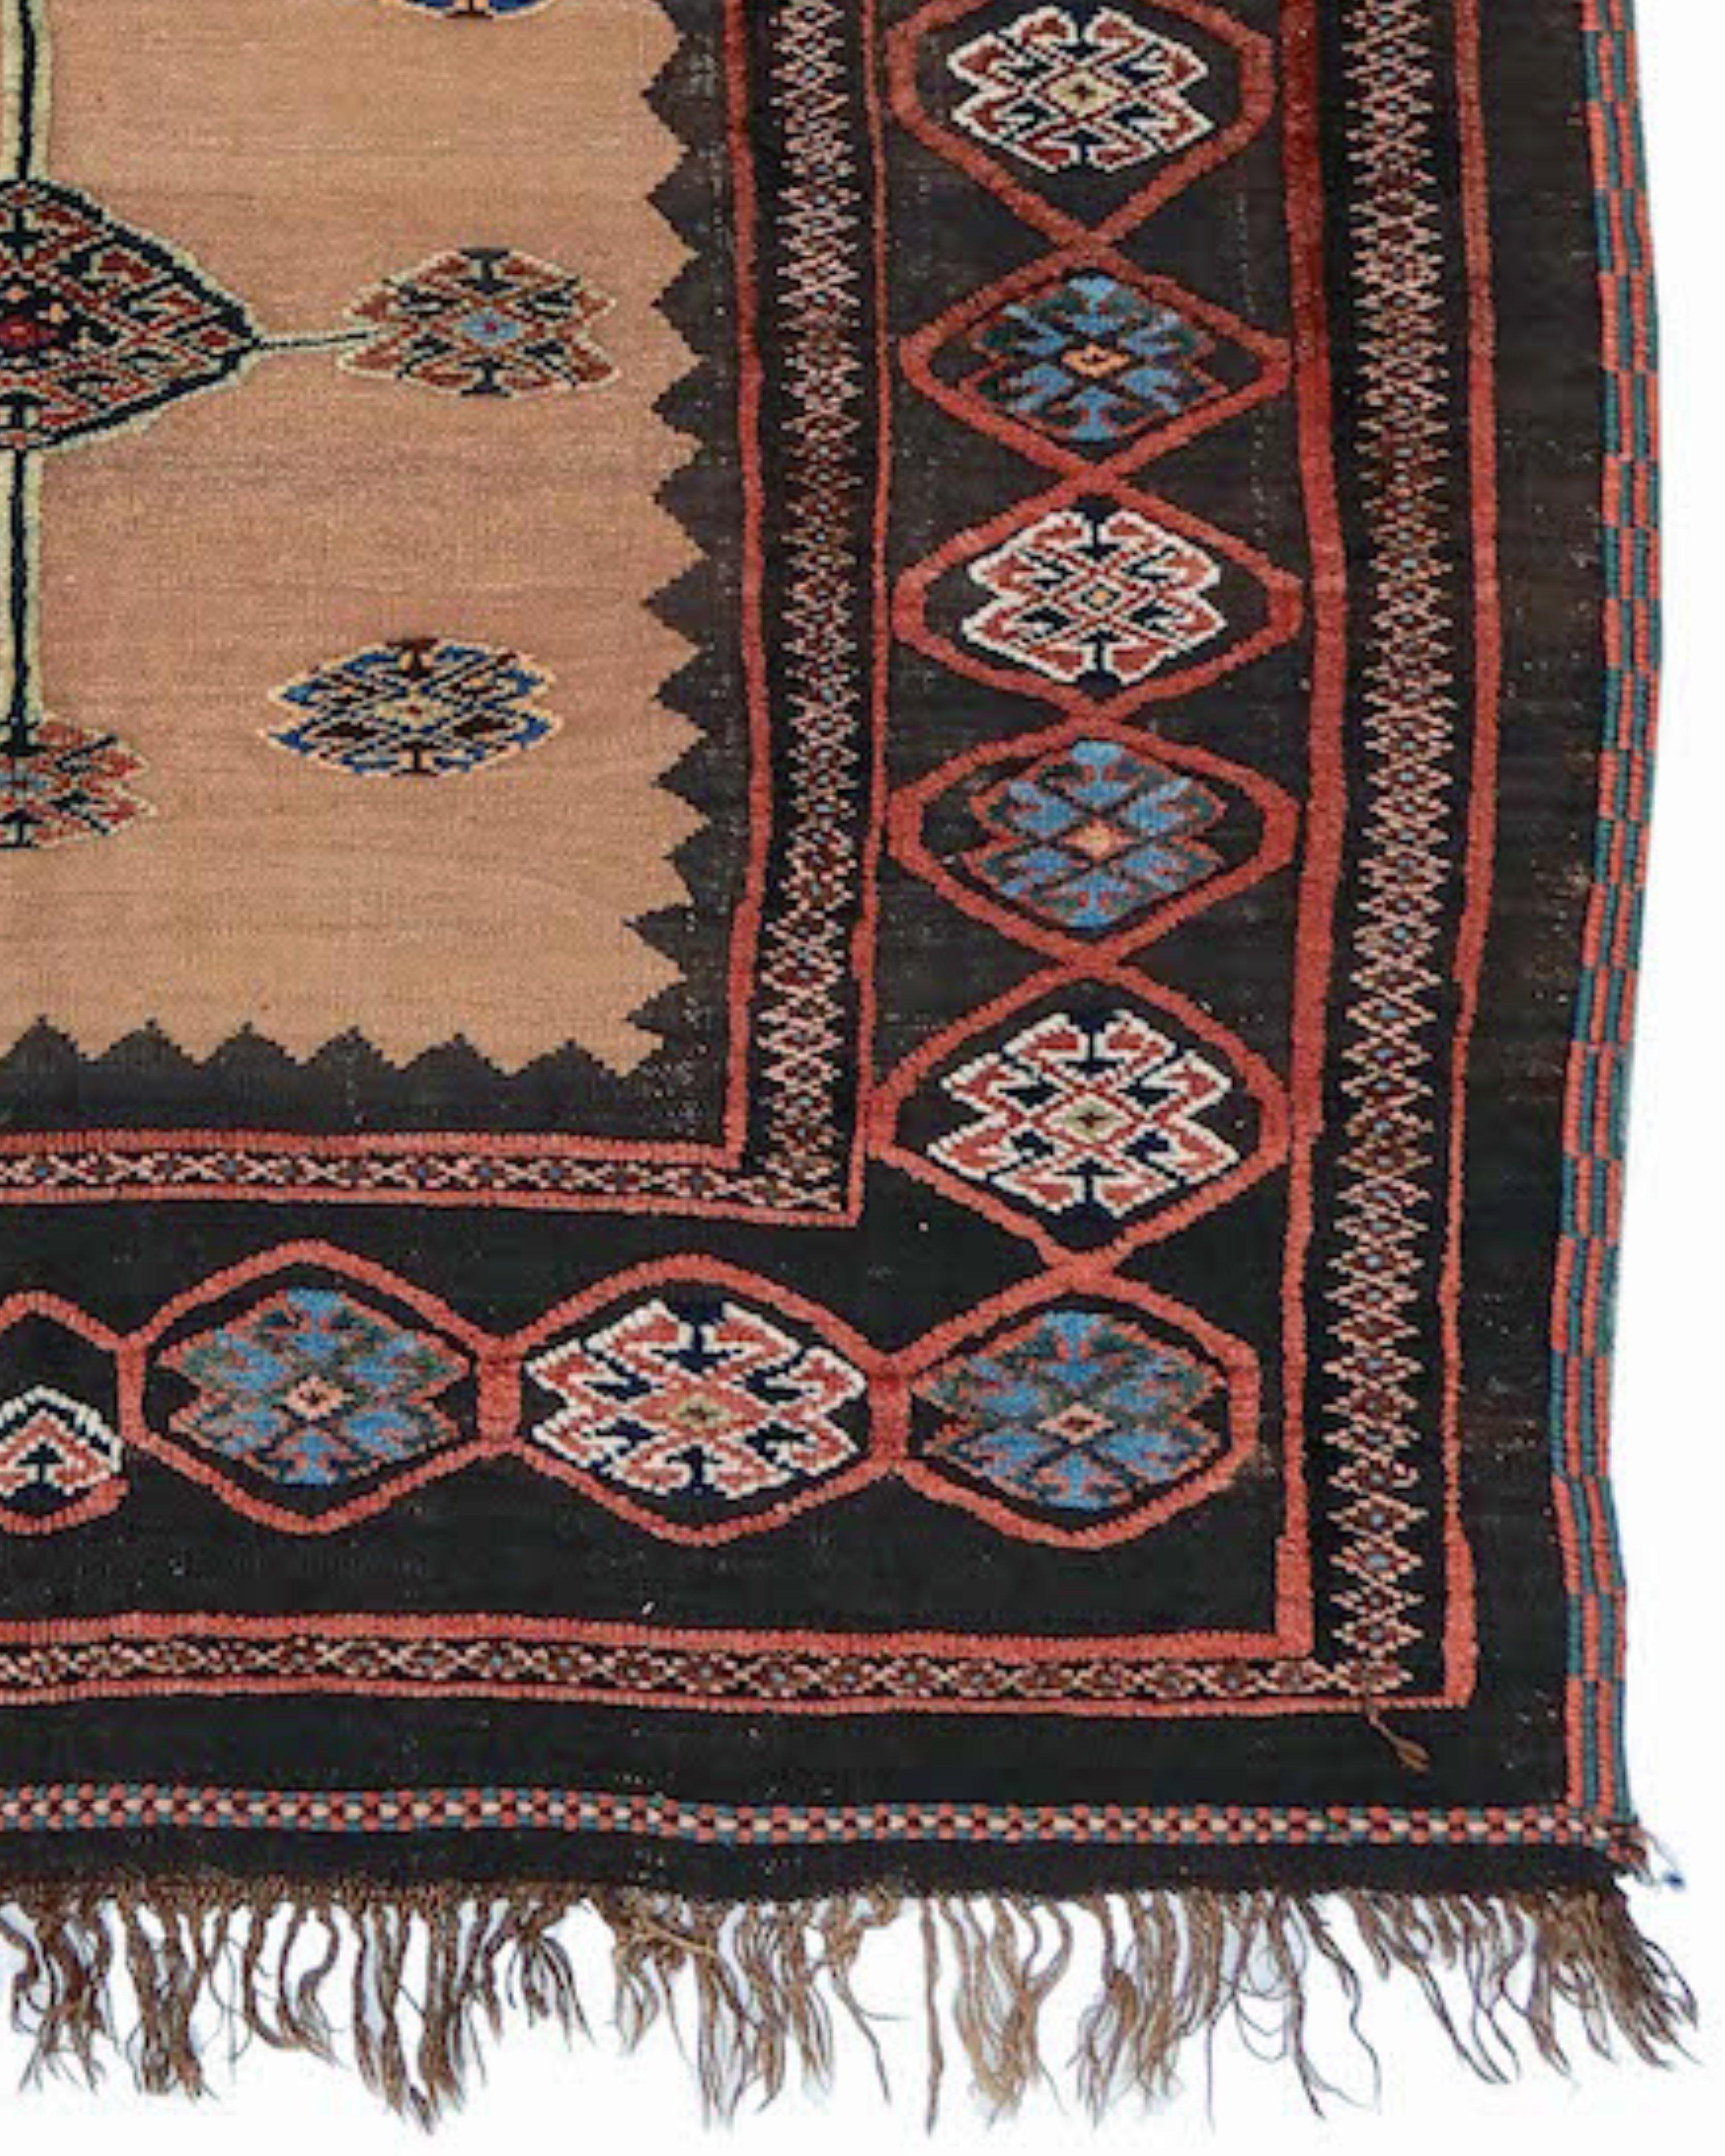 Luri Soffreh Rug, Early 20th Century In Excellent Condition For Sale In San Francisco, CA